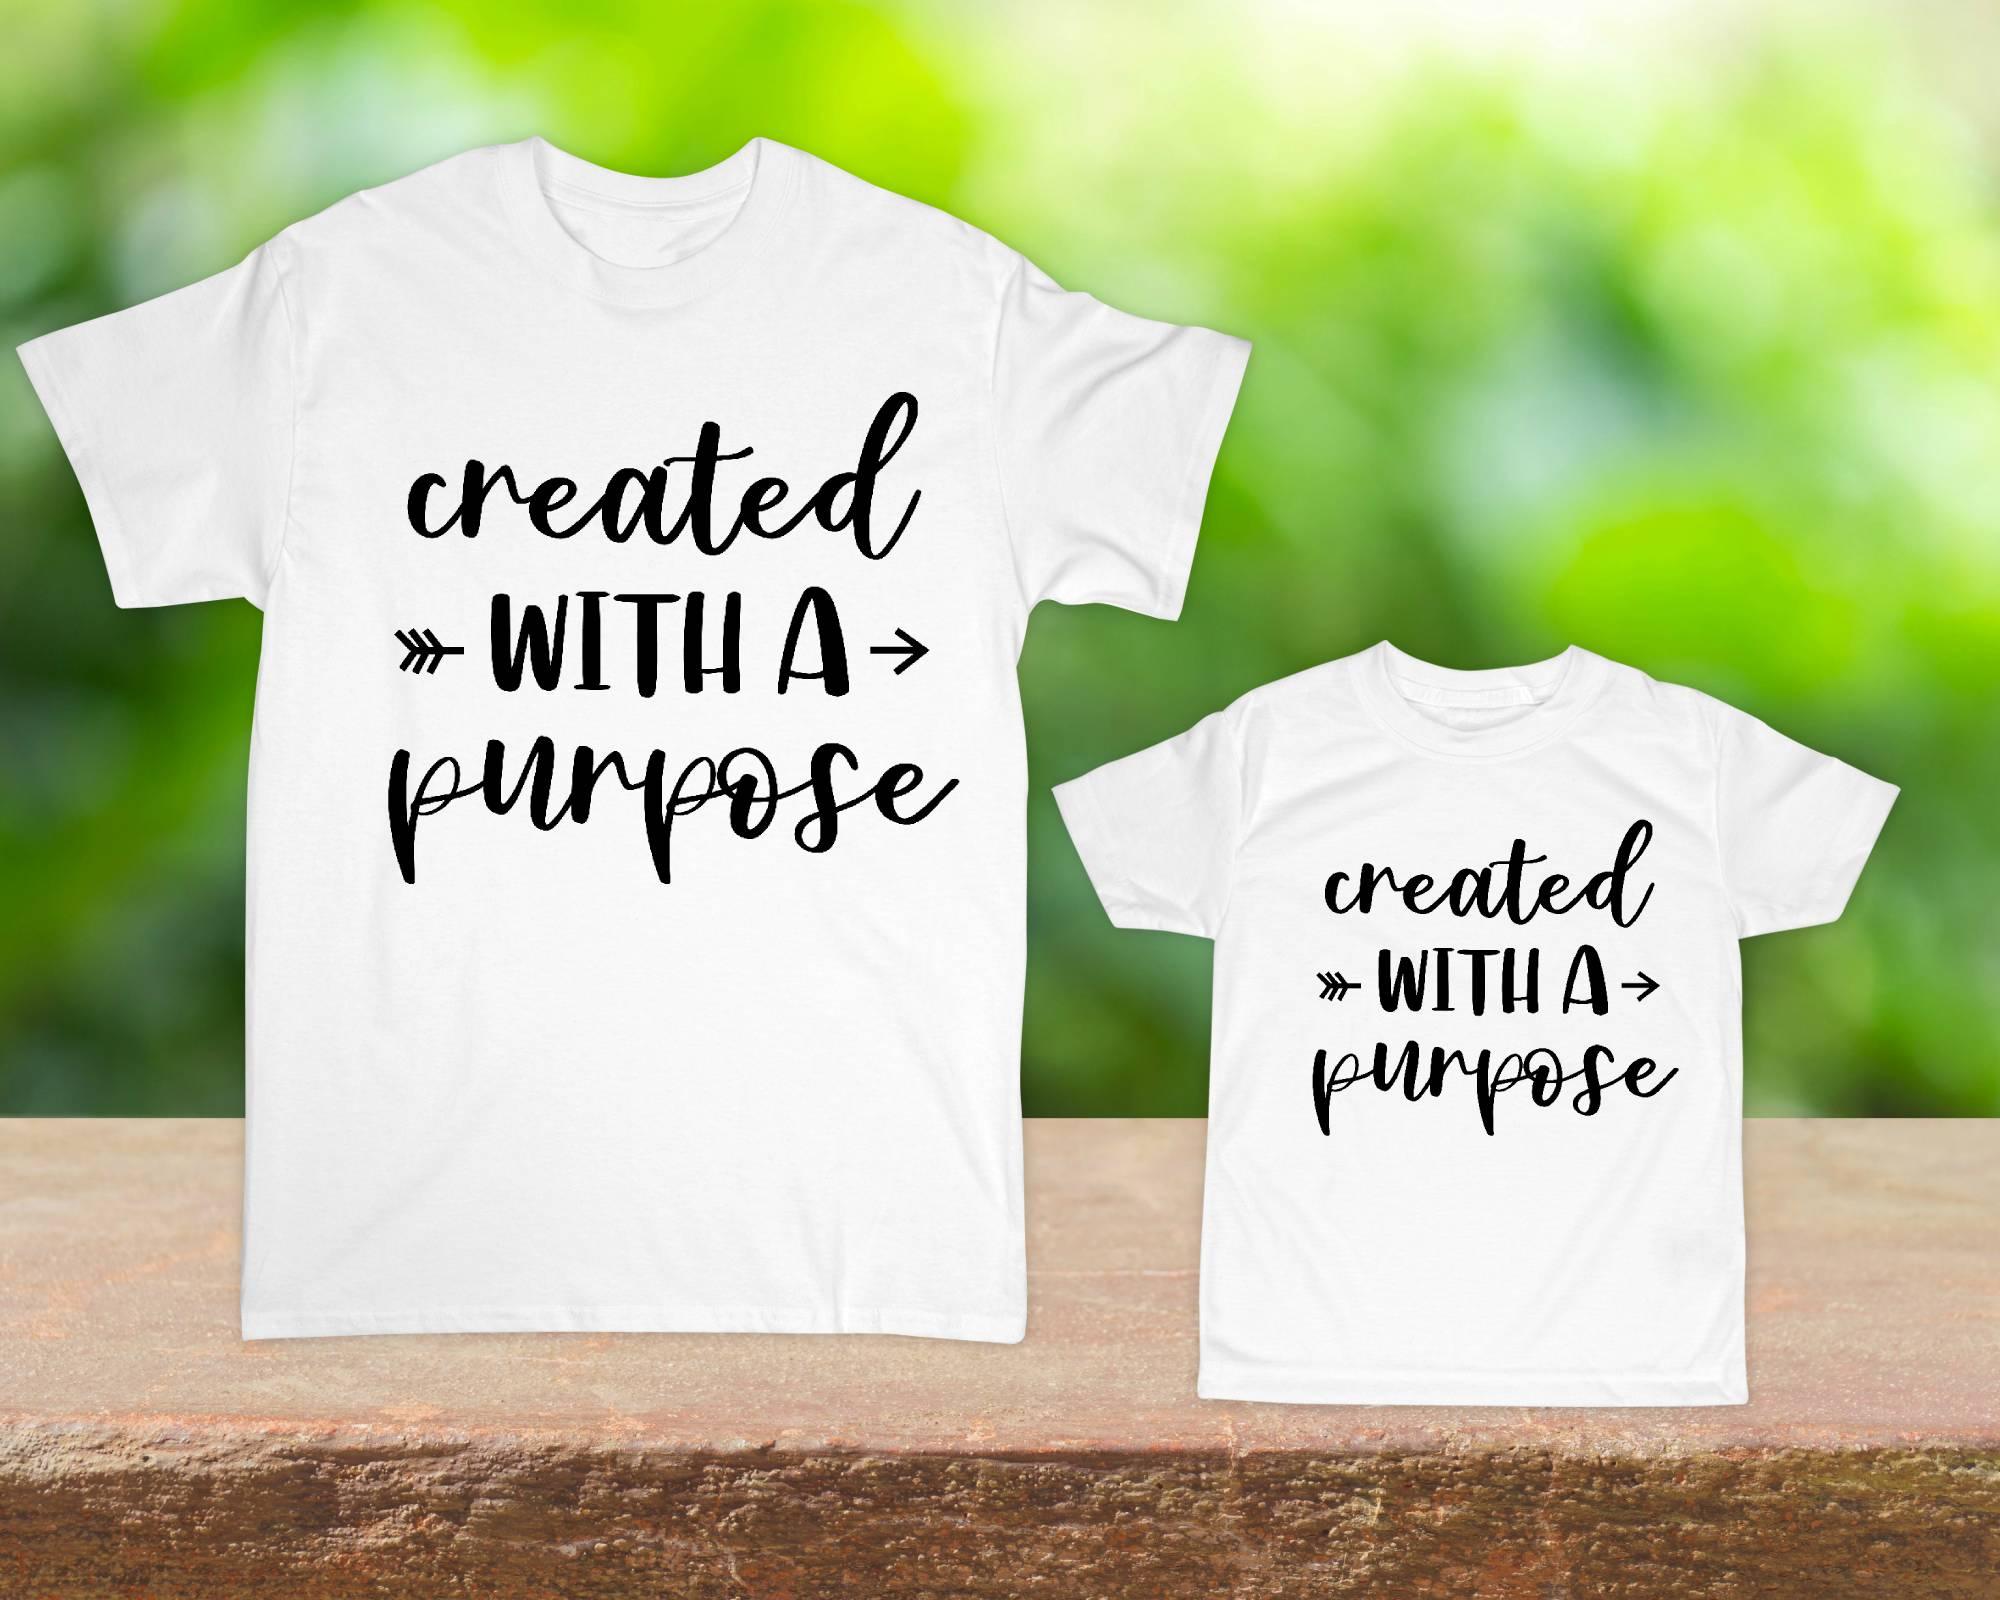 Created with a Purpose - Shirt - Rejoice In Creation